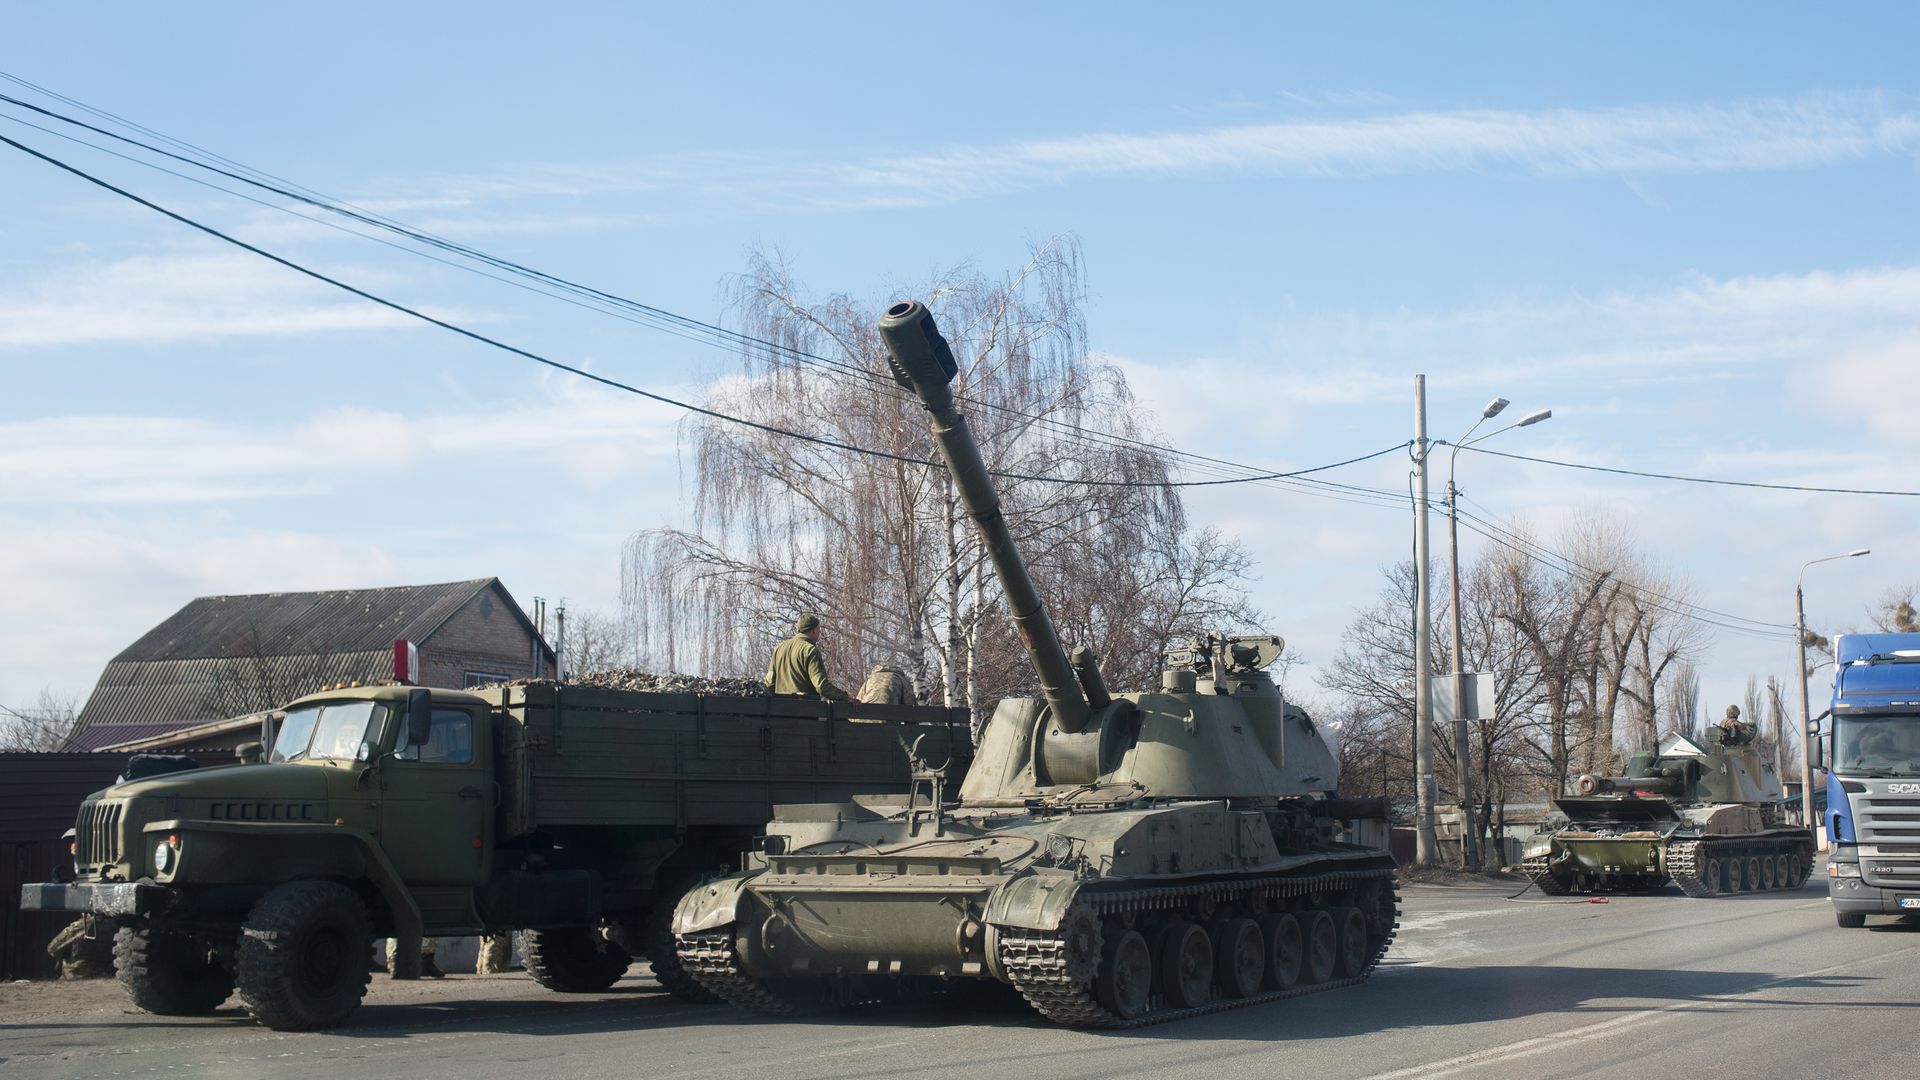 Military vehicles are seen along a street on February 25, 2022 in Kyiv, Ukraine.